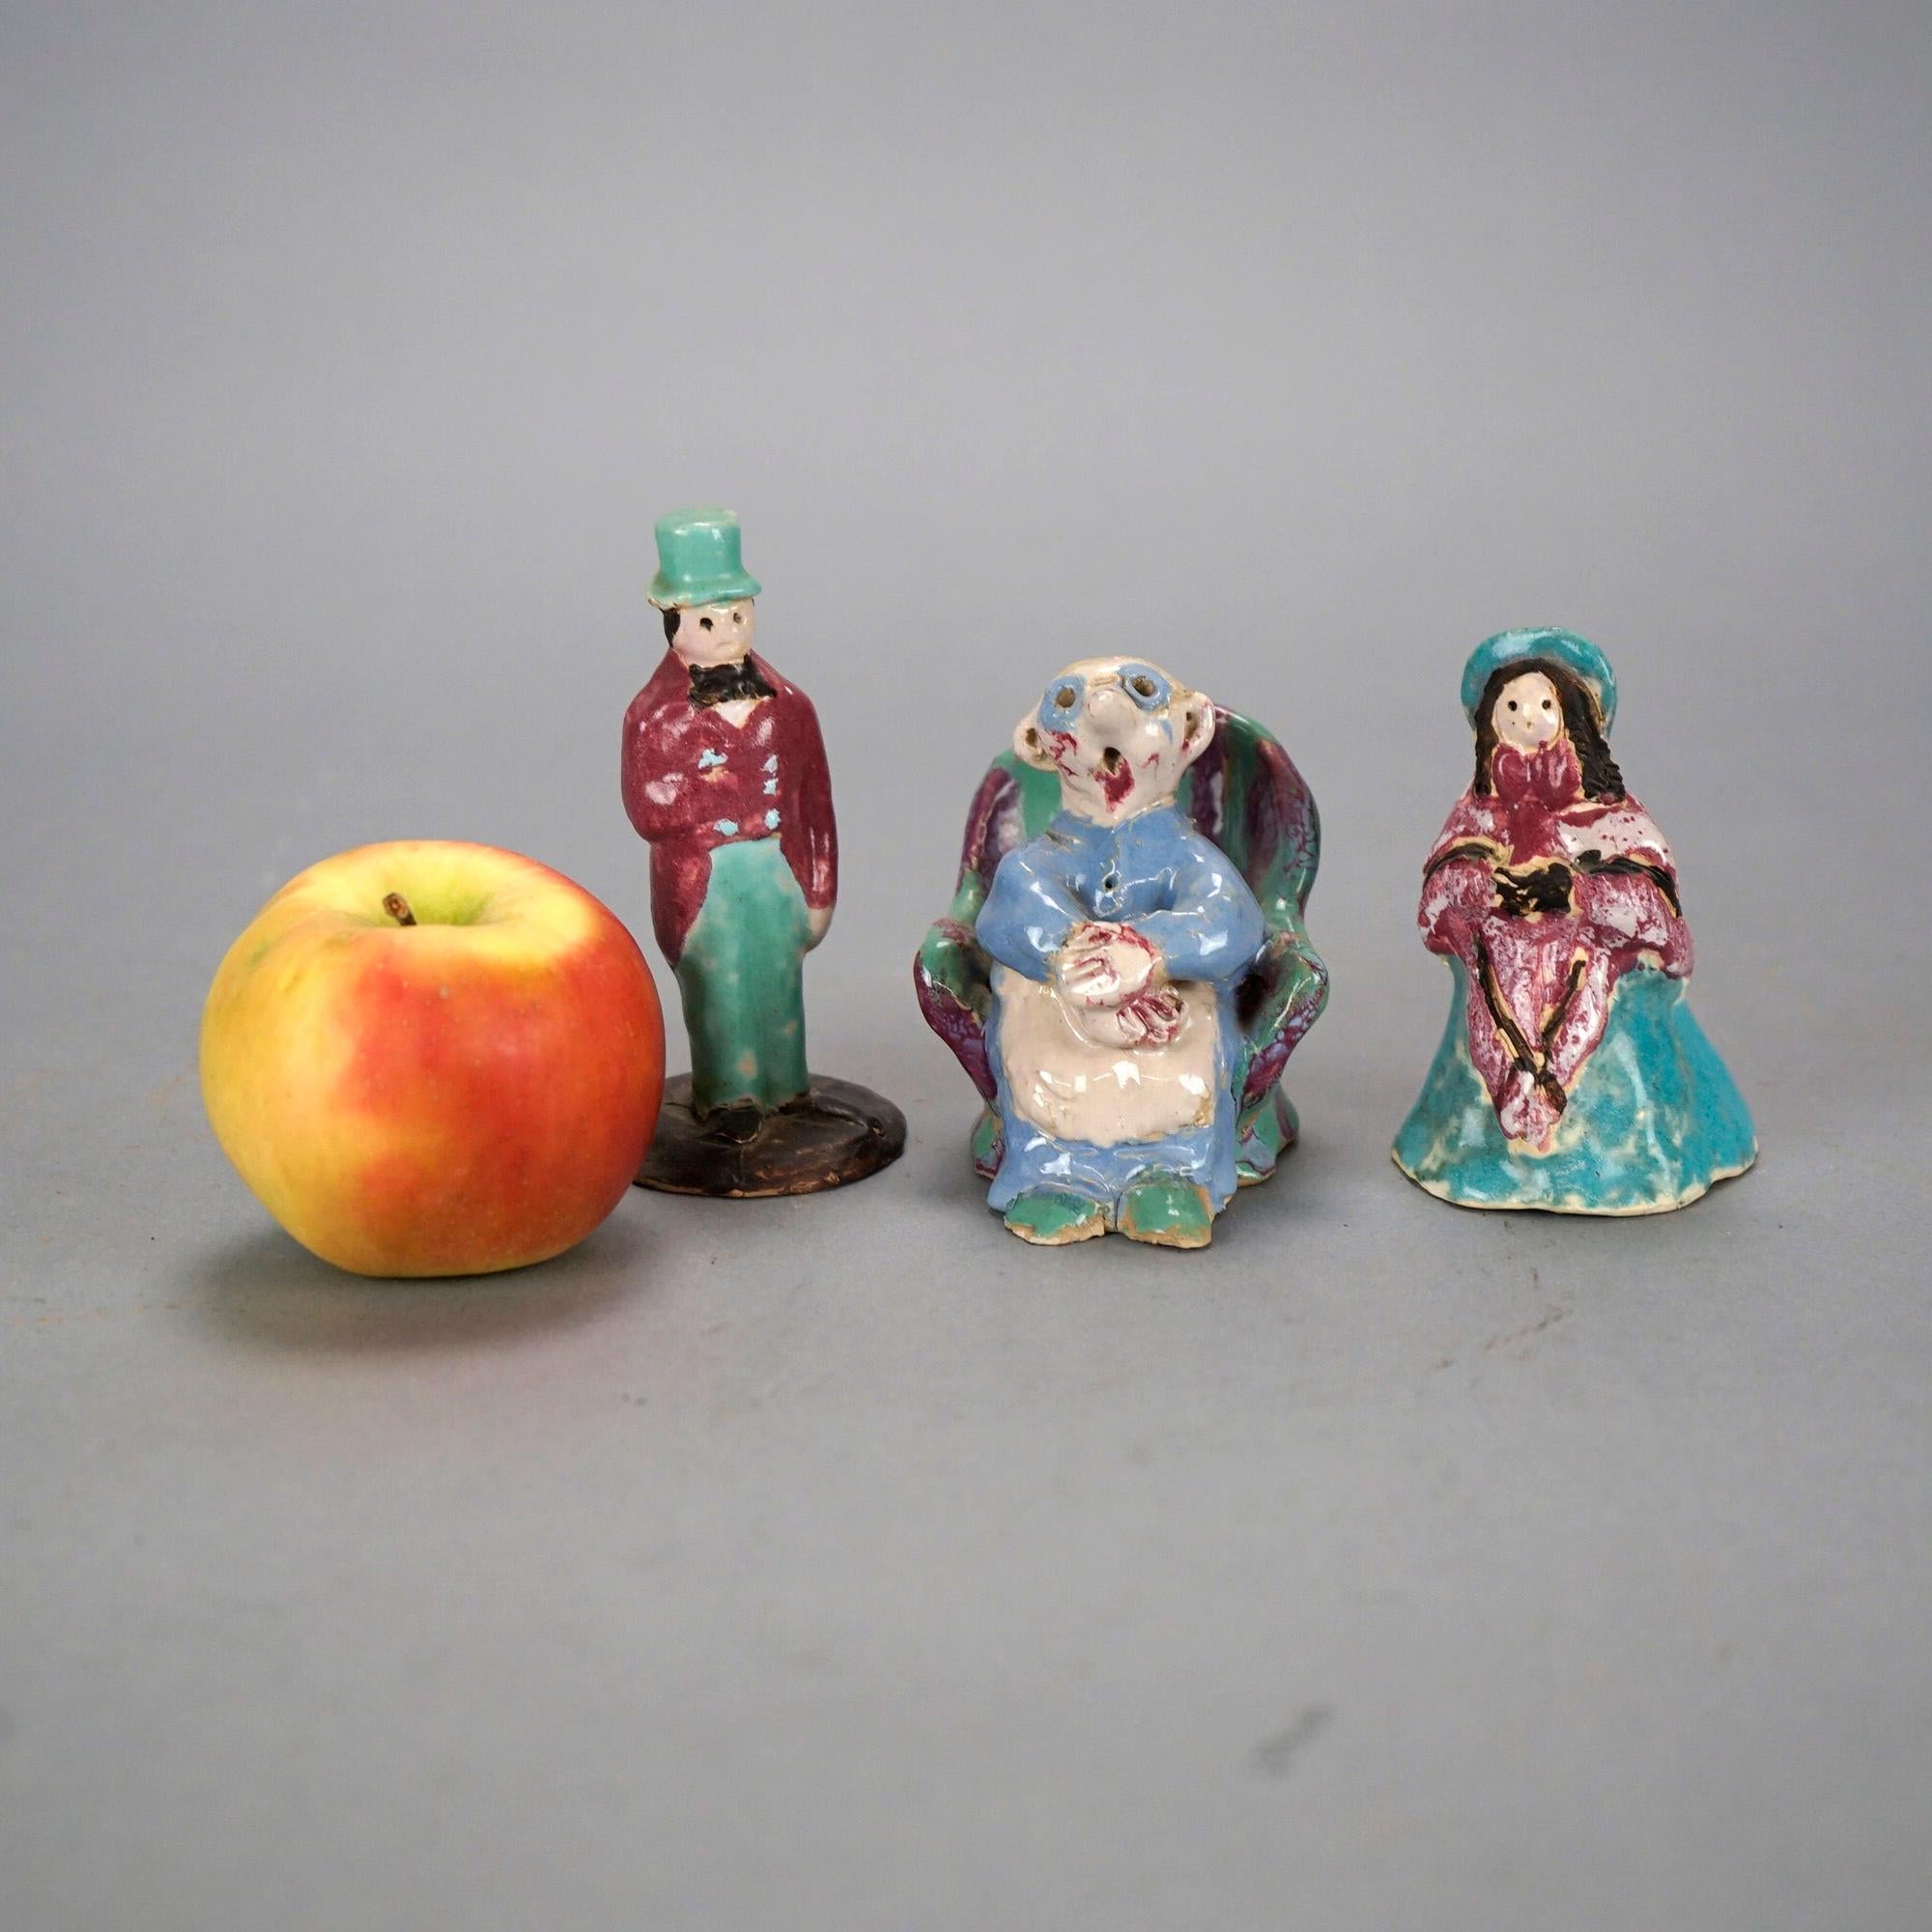 Hand-Crafted Three Antique Pottery Figurines by Overbeck, Circa 1920